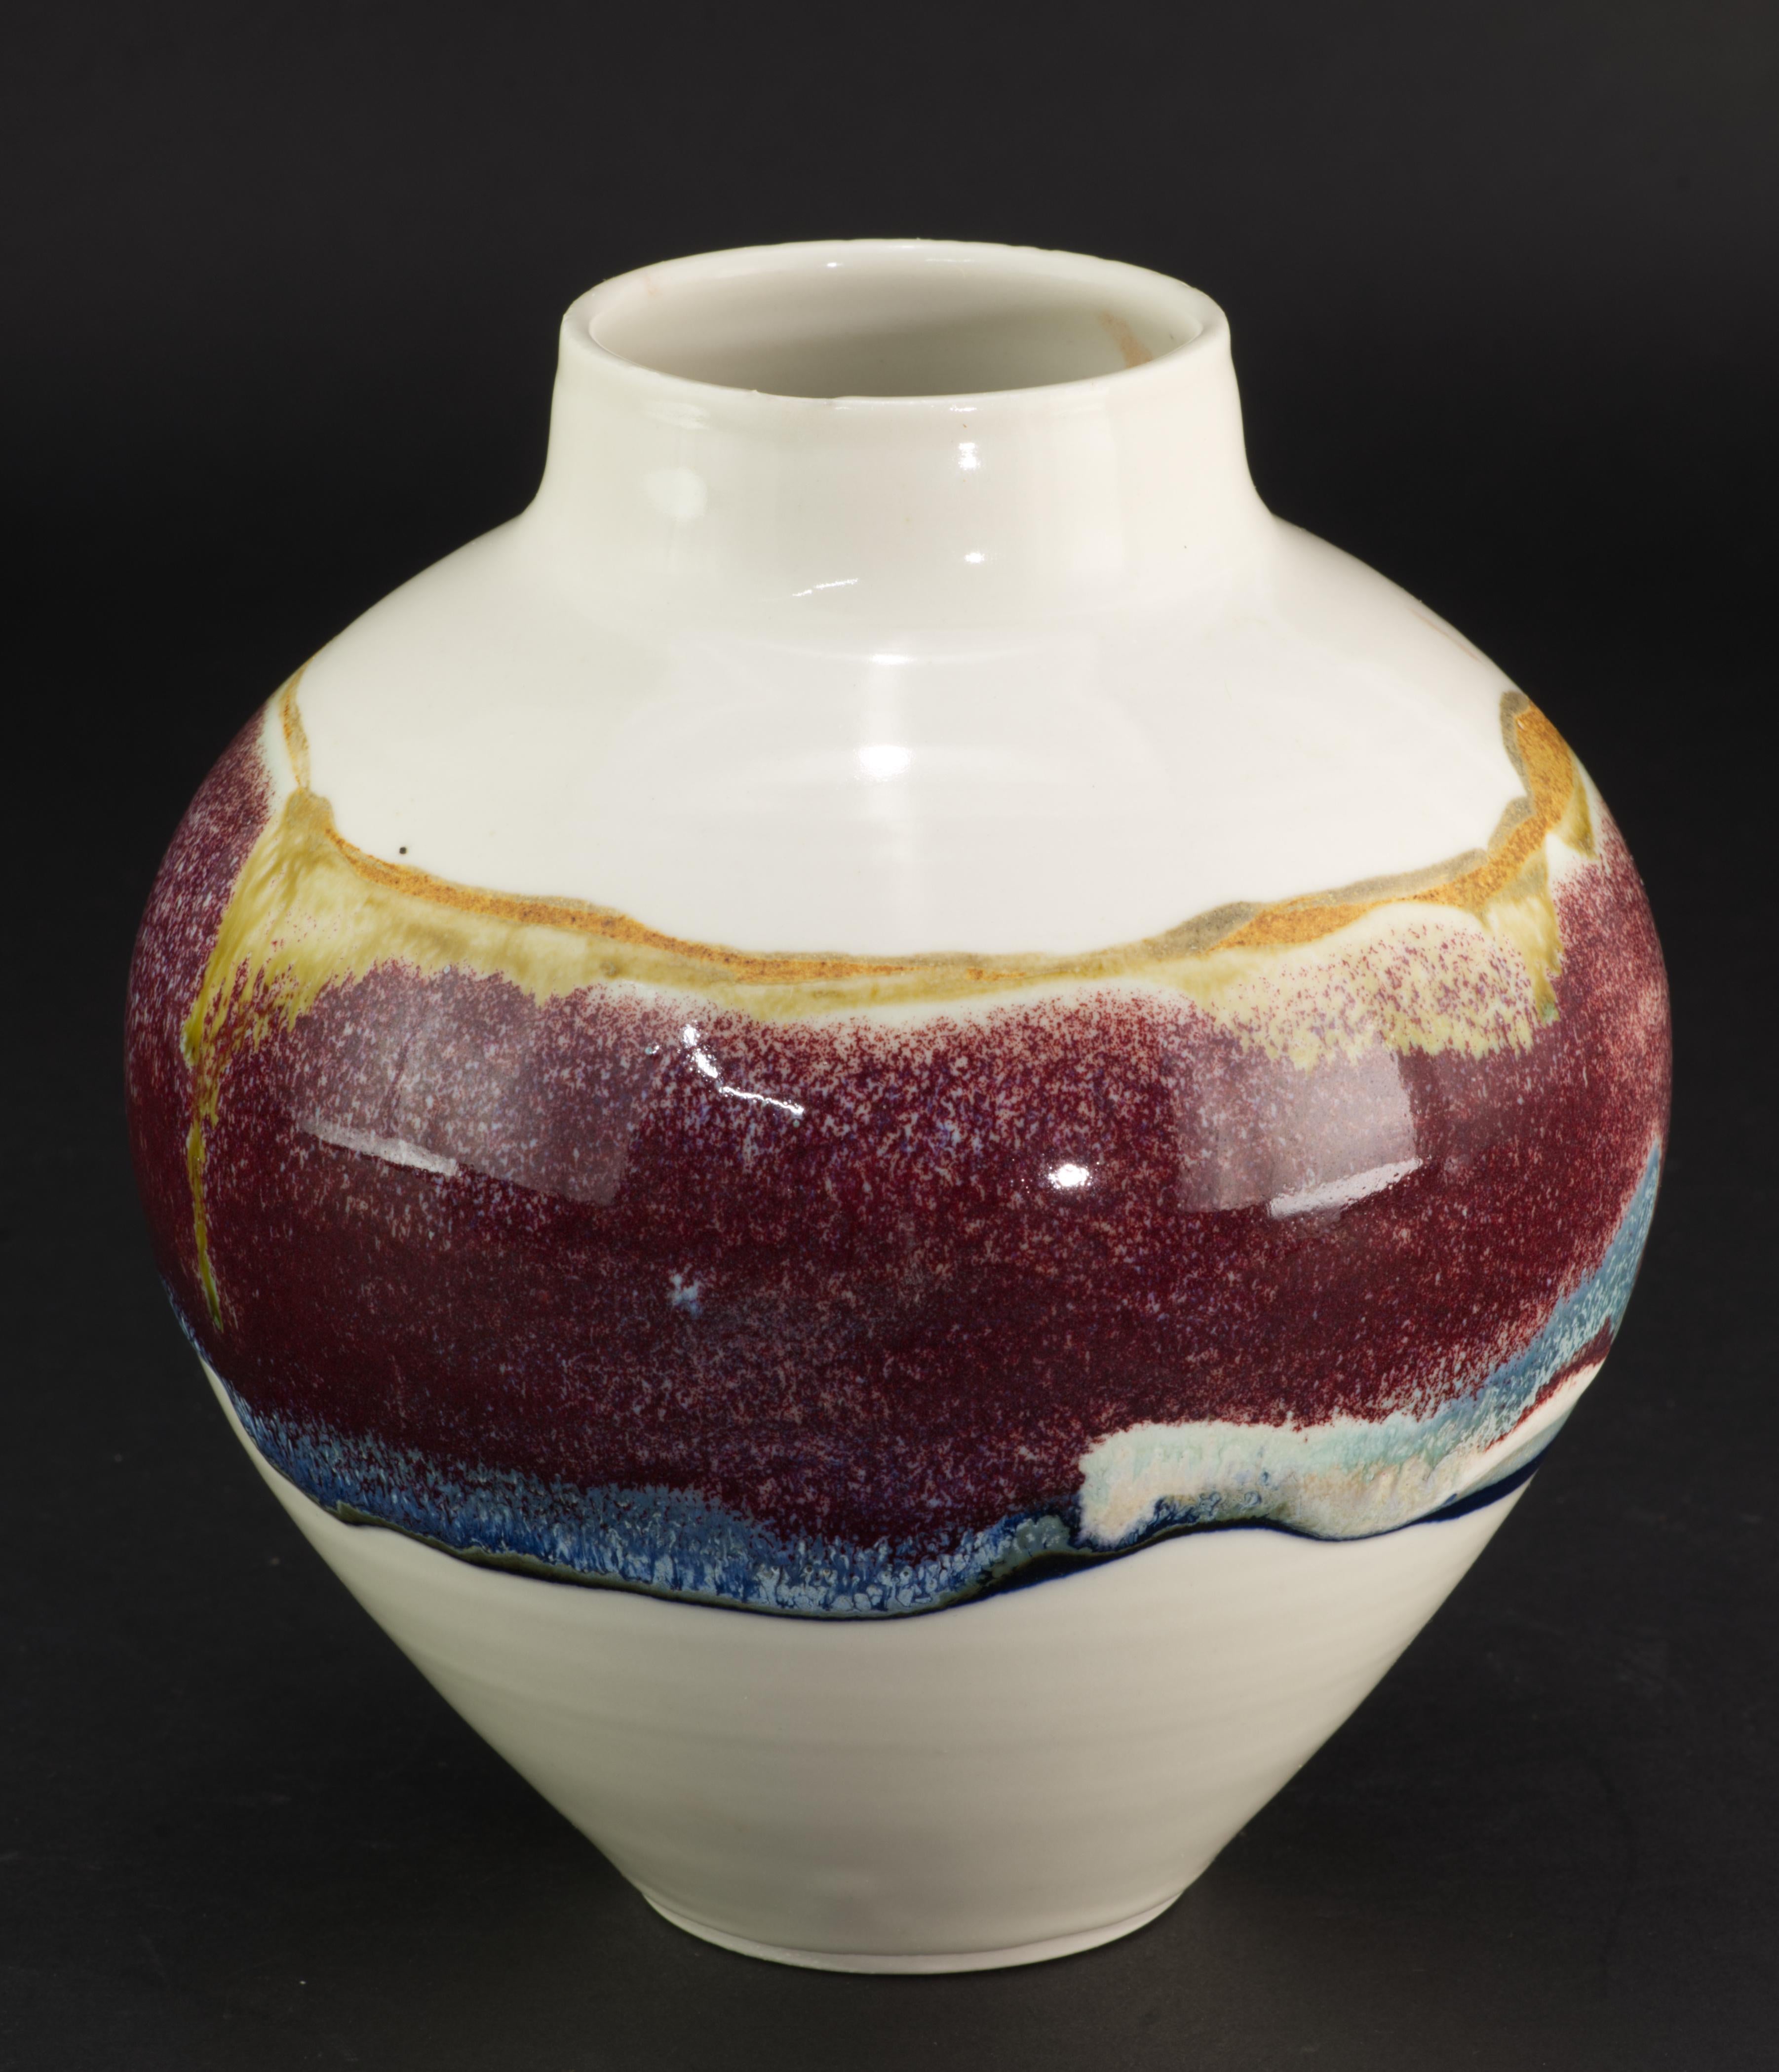  Mid-century hand thrown art ceramics vase has clean and minimal shape; it was made of white clay with thick band of vibrant multicolored fat lava glaze decoration on the widest part of the body; semi-matte solid white glaze was used for the rest of